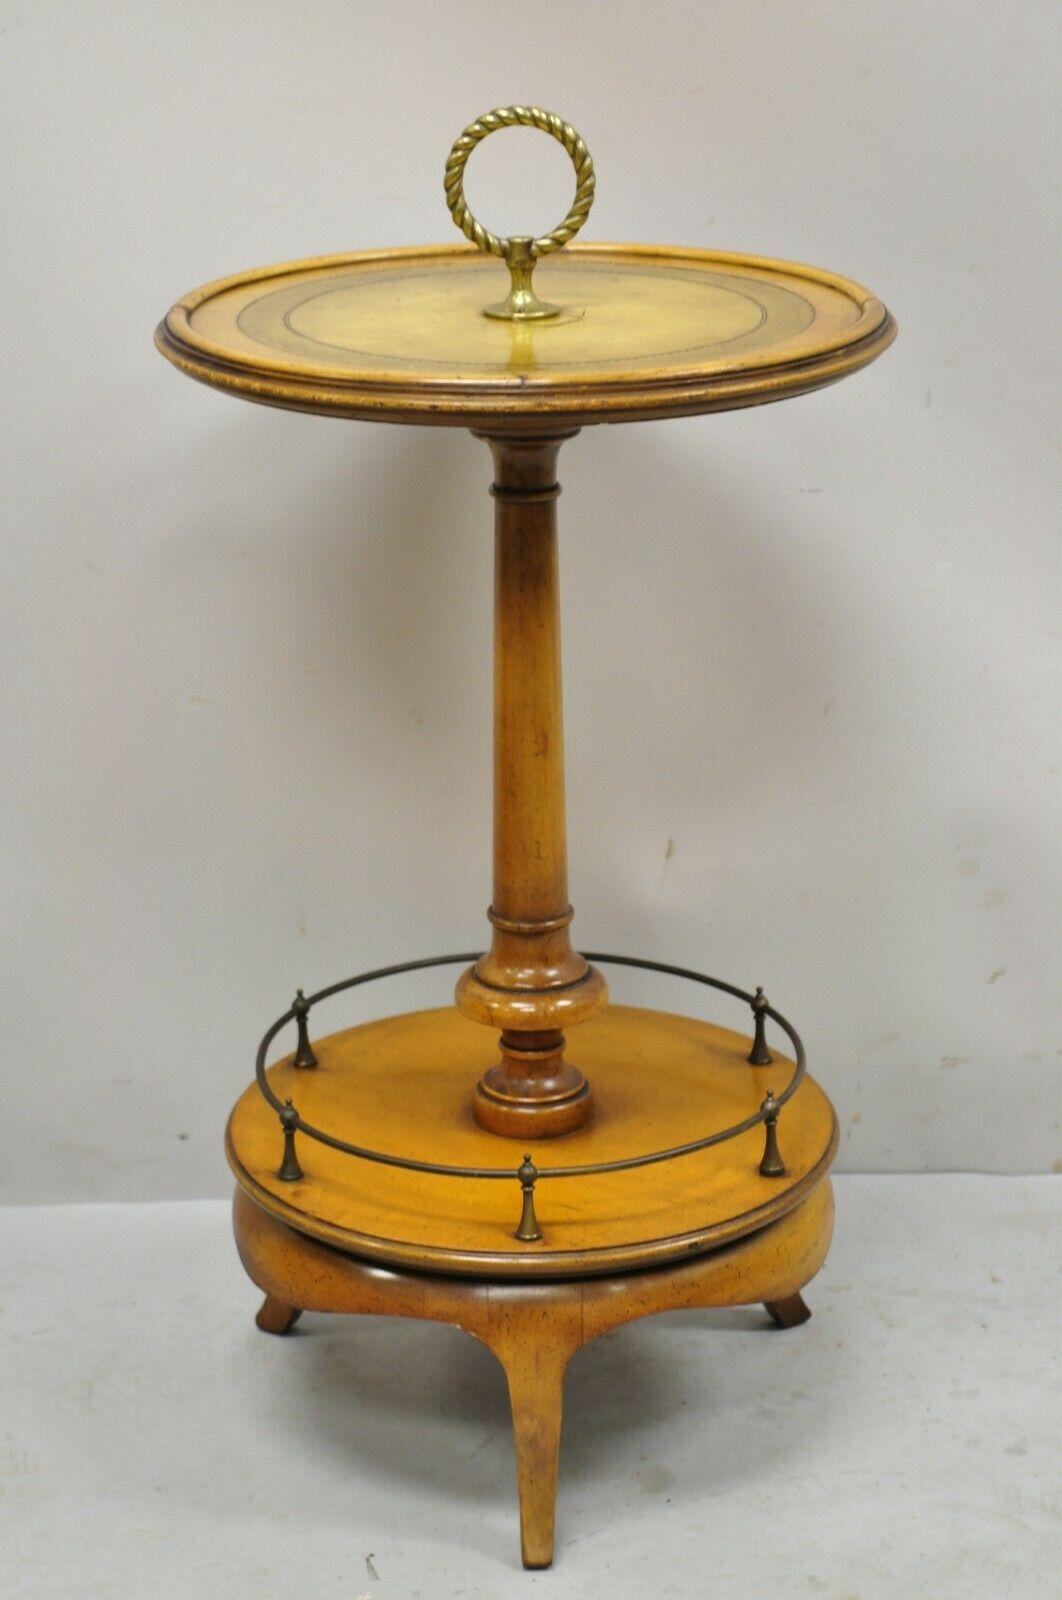 Weiman Heirloom small leather top round smoking Stand side table with brass ring. Item features a tooled leather top, brass ring handle, nice small size, original stamp, very nice vintage item, quality American craftsmanship. Circa Mid 20th Century.